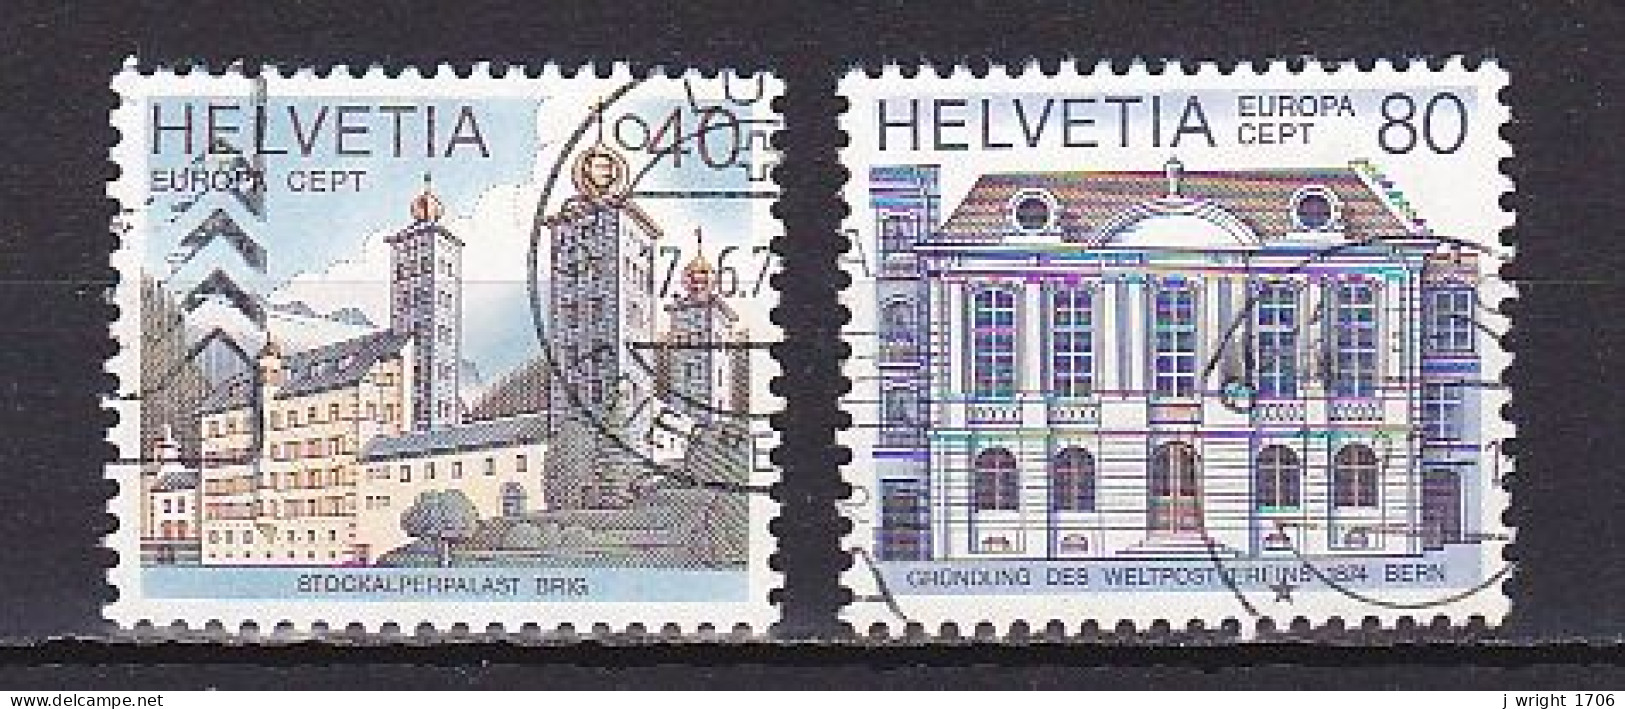 Switzerland, 1978, Europa CEPT, Set, USED - Used Stamps